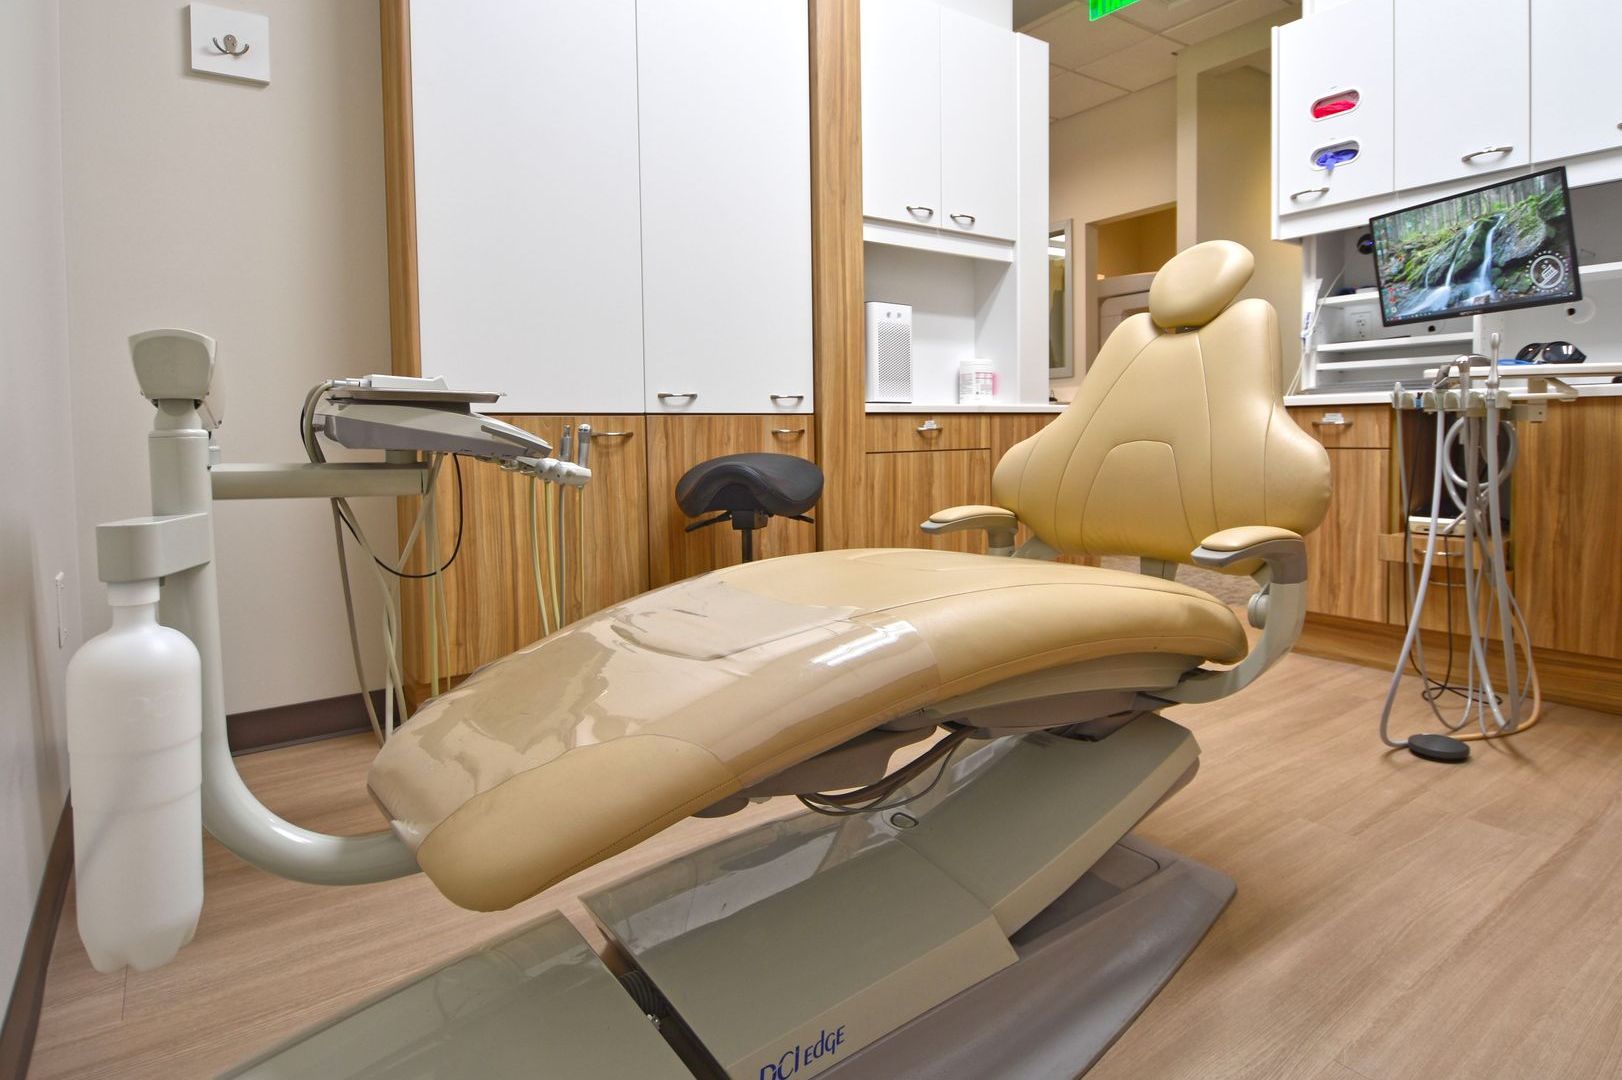 A state-of-the-art dental chair in the office of Totem Lake Dental in Kirkland, WA